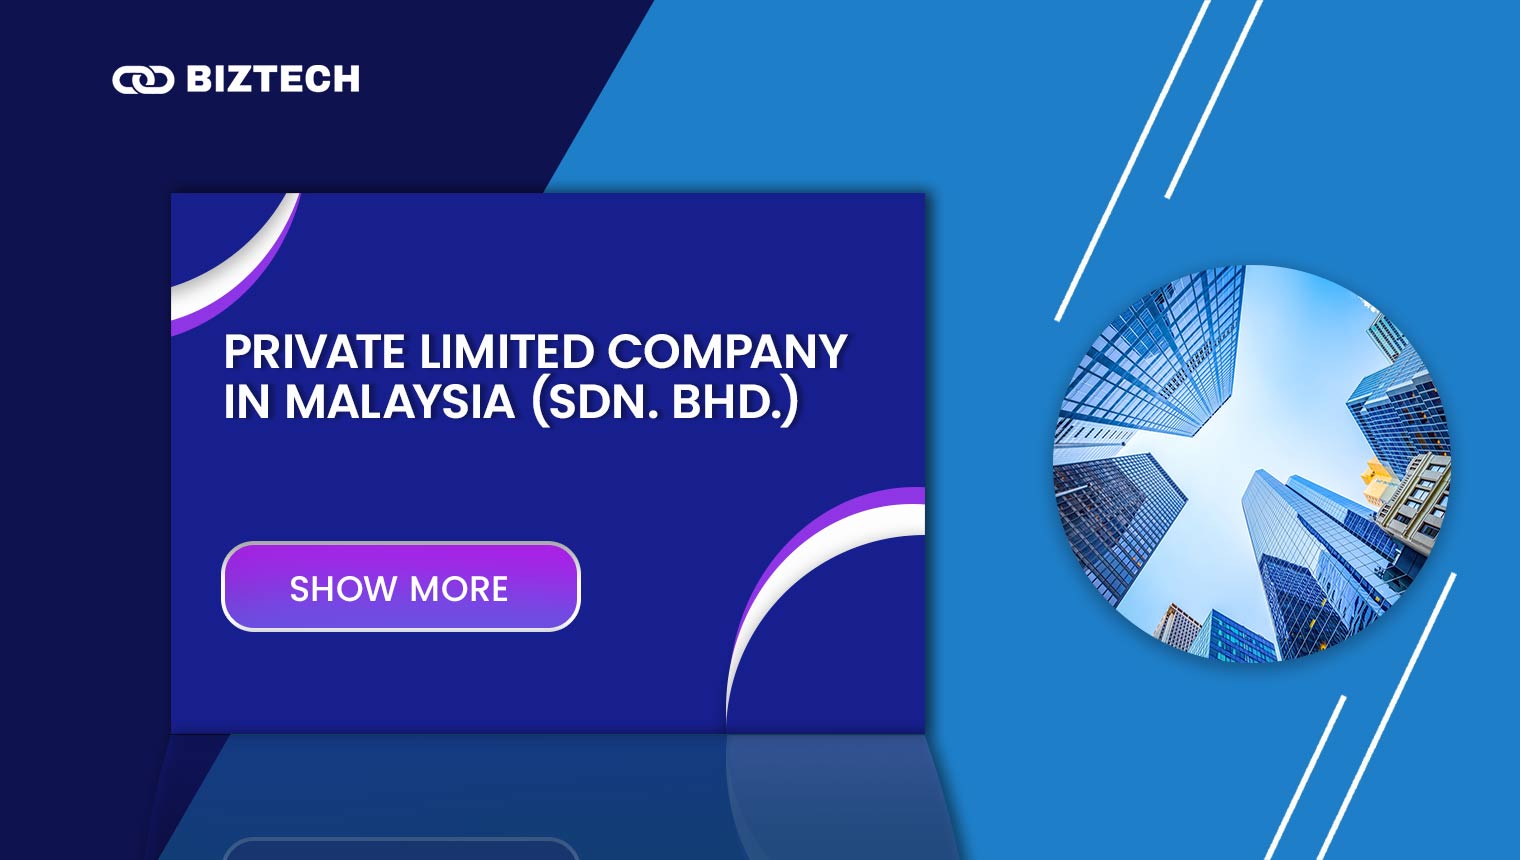 Private limited company in Malaysia (Sdn. Bhd.)